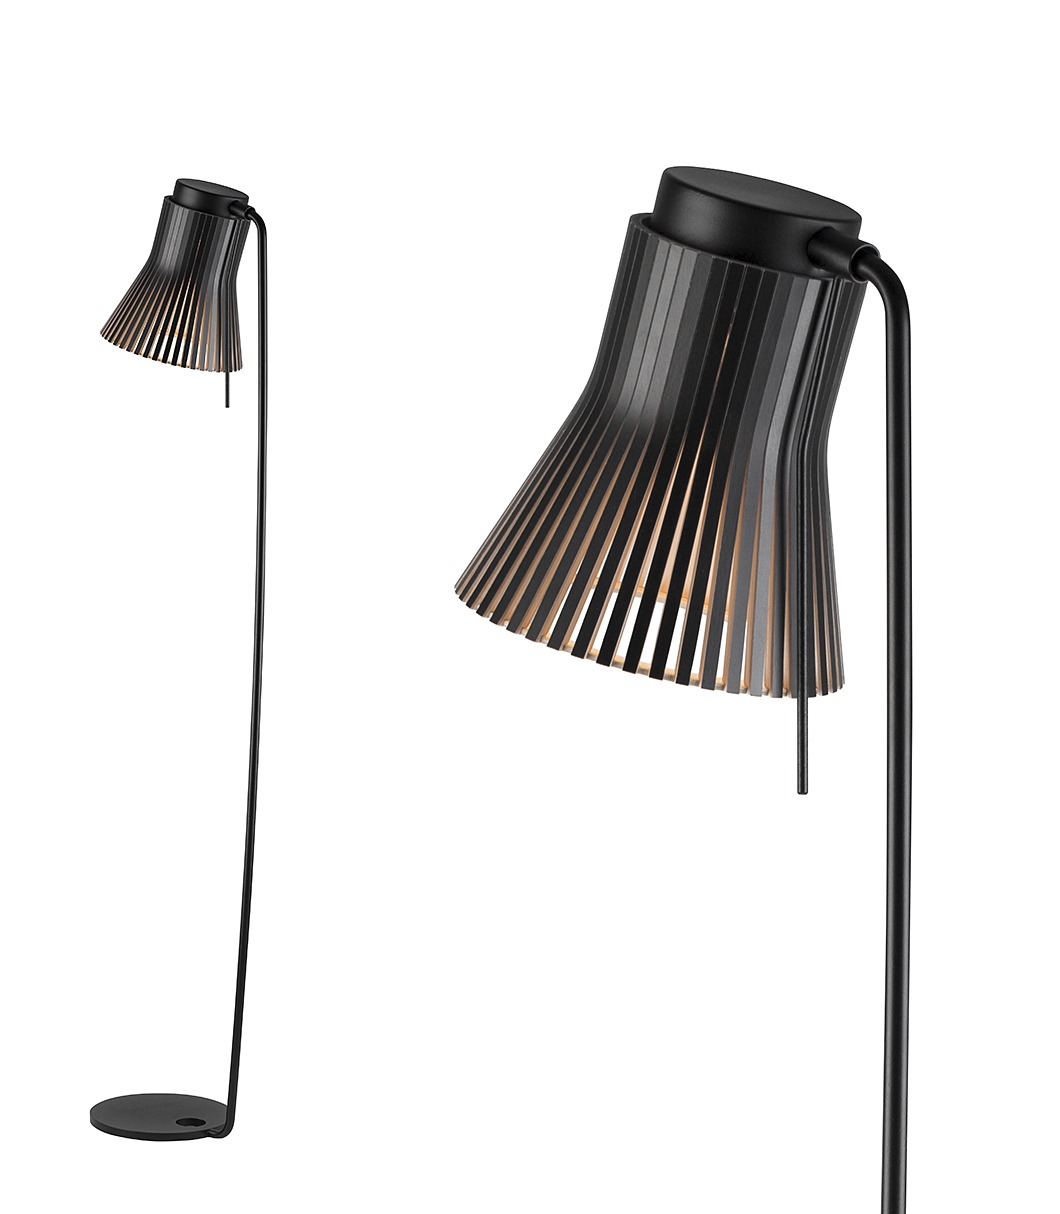 Petite 4610 floor lamp is available in black laminated